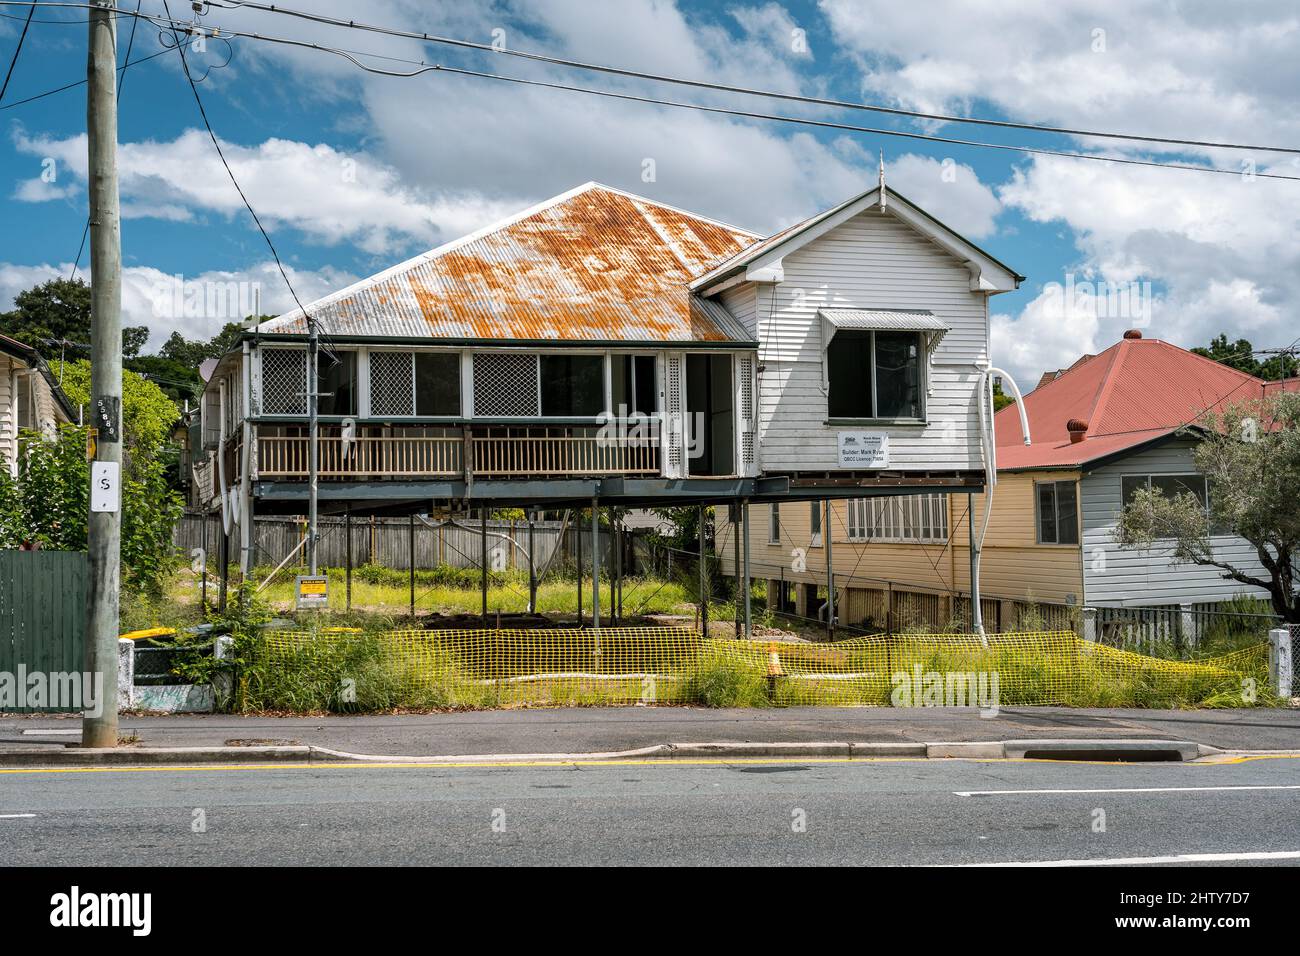 Brisbane, Australia - Traditional Queenslander timber house on stilts to protect from floods Stock Photo